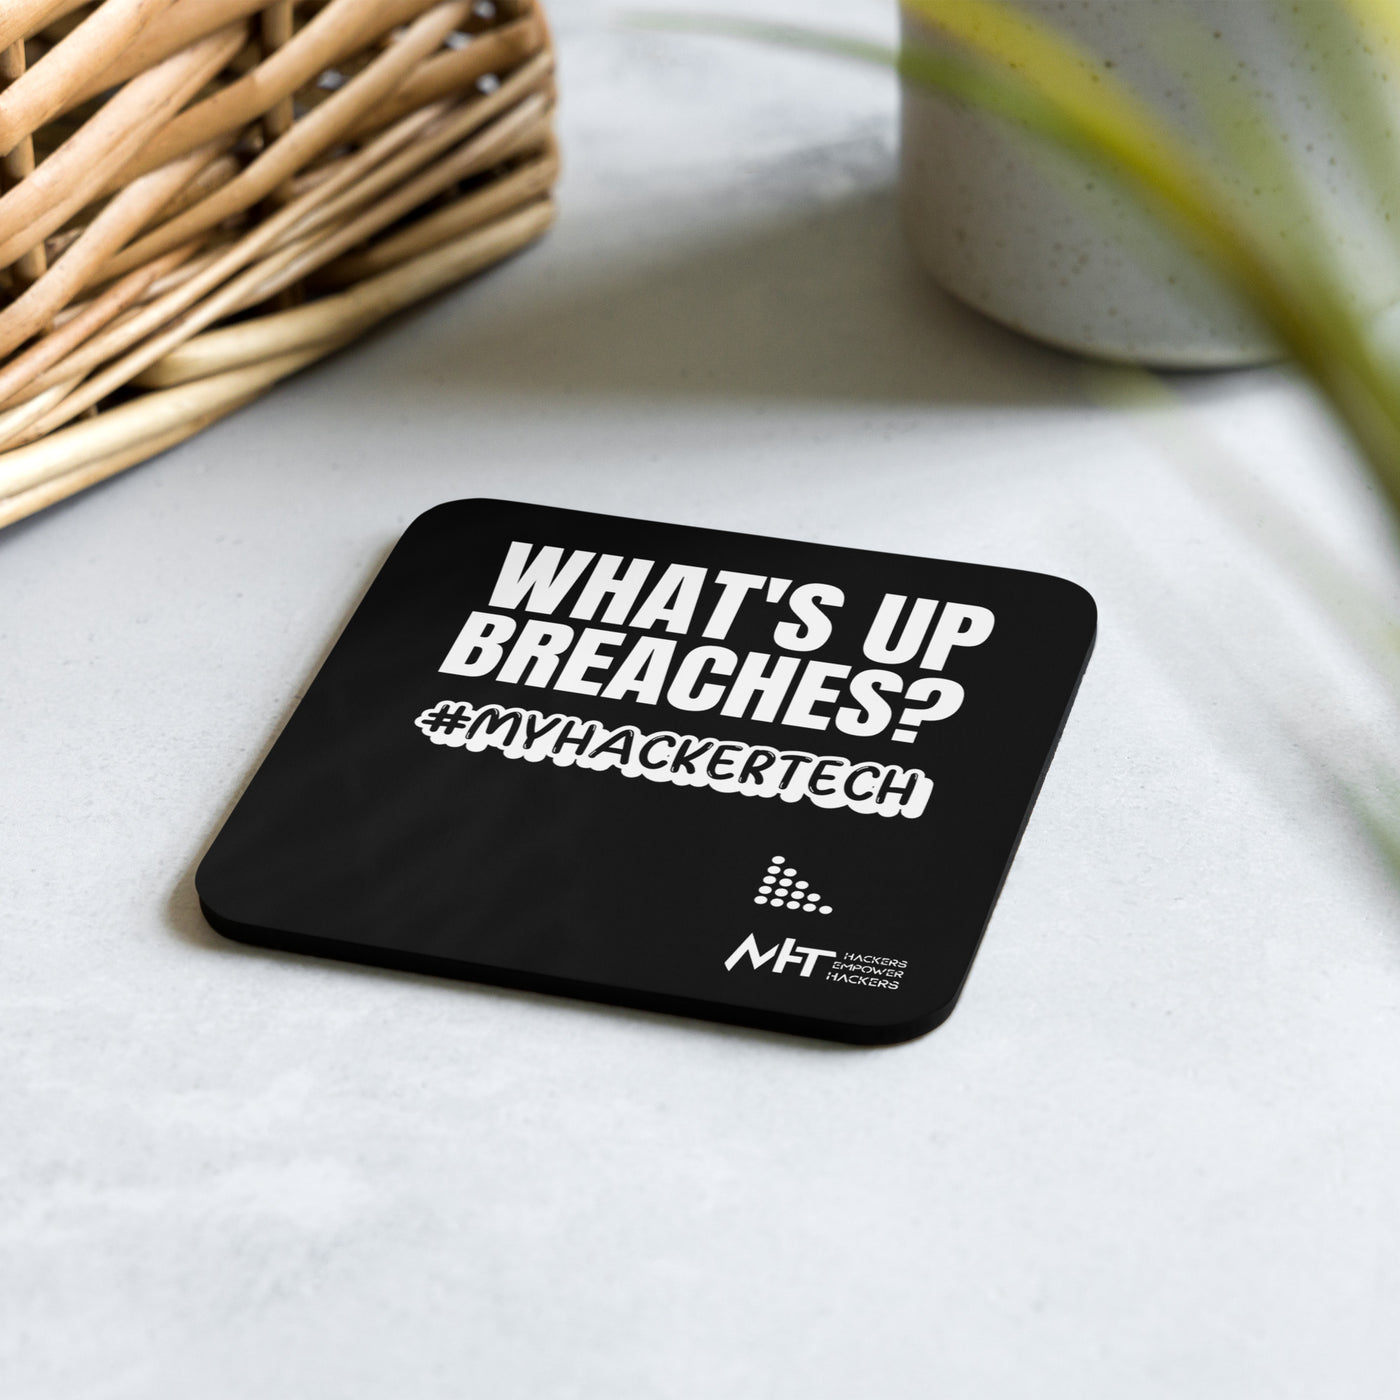 What's up breaches - Cork-back coaster